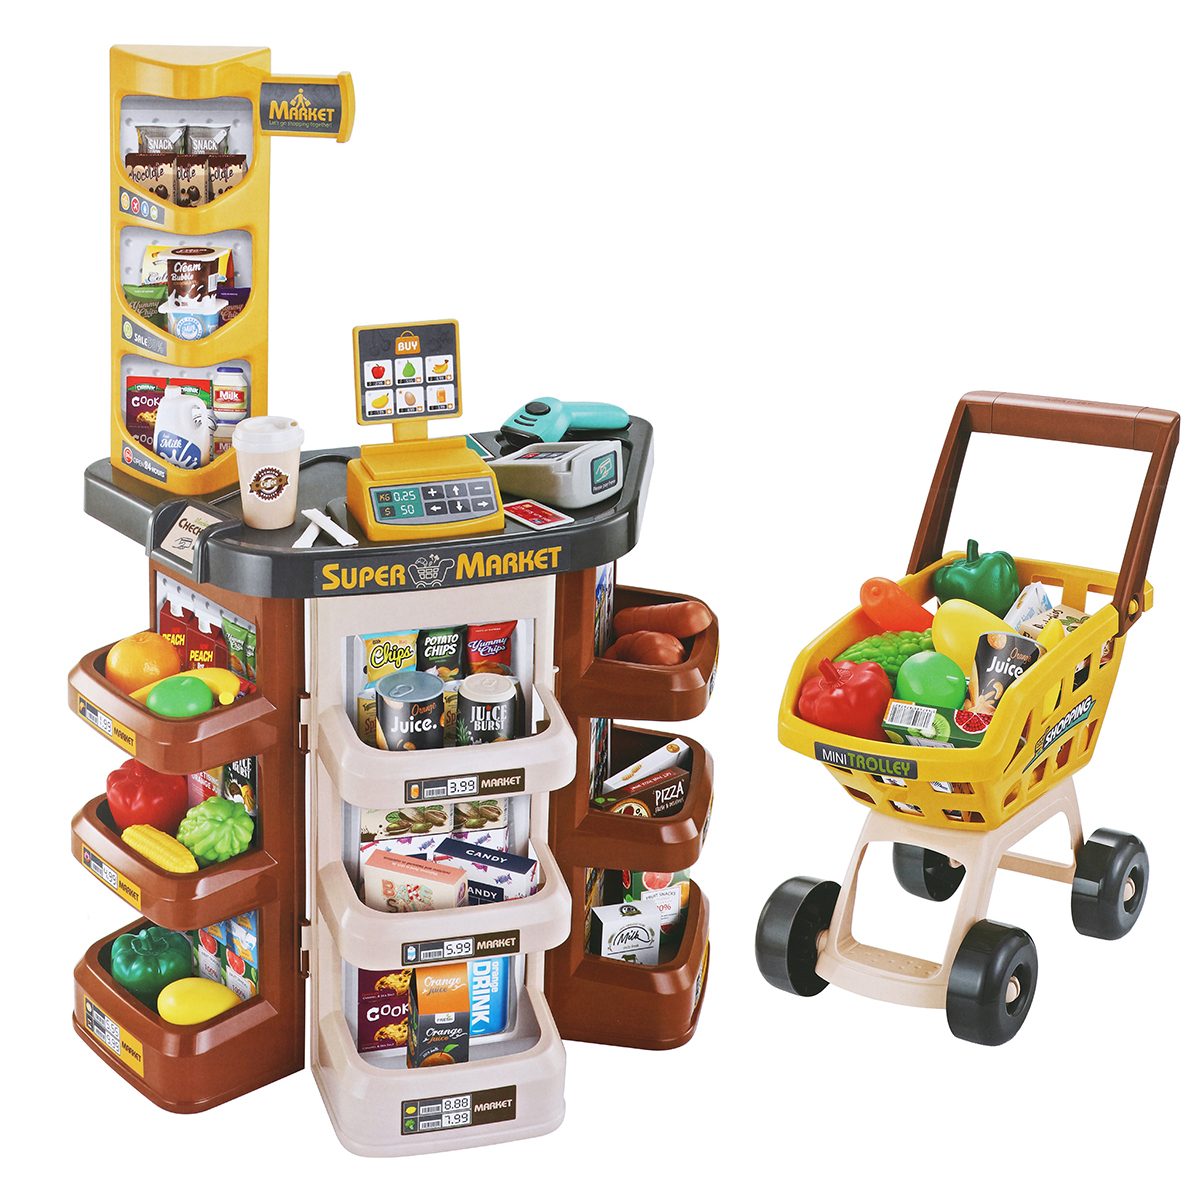 Children-Play-House-Kitchen-Simulation-Toys-Scanner-Credit-Card-Machine-Trolley-Shopping-Trolley-Cas-1635566-8